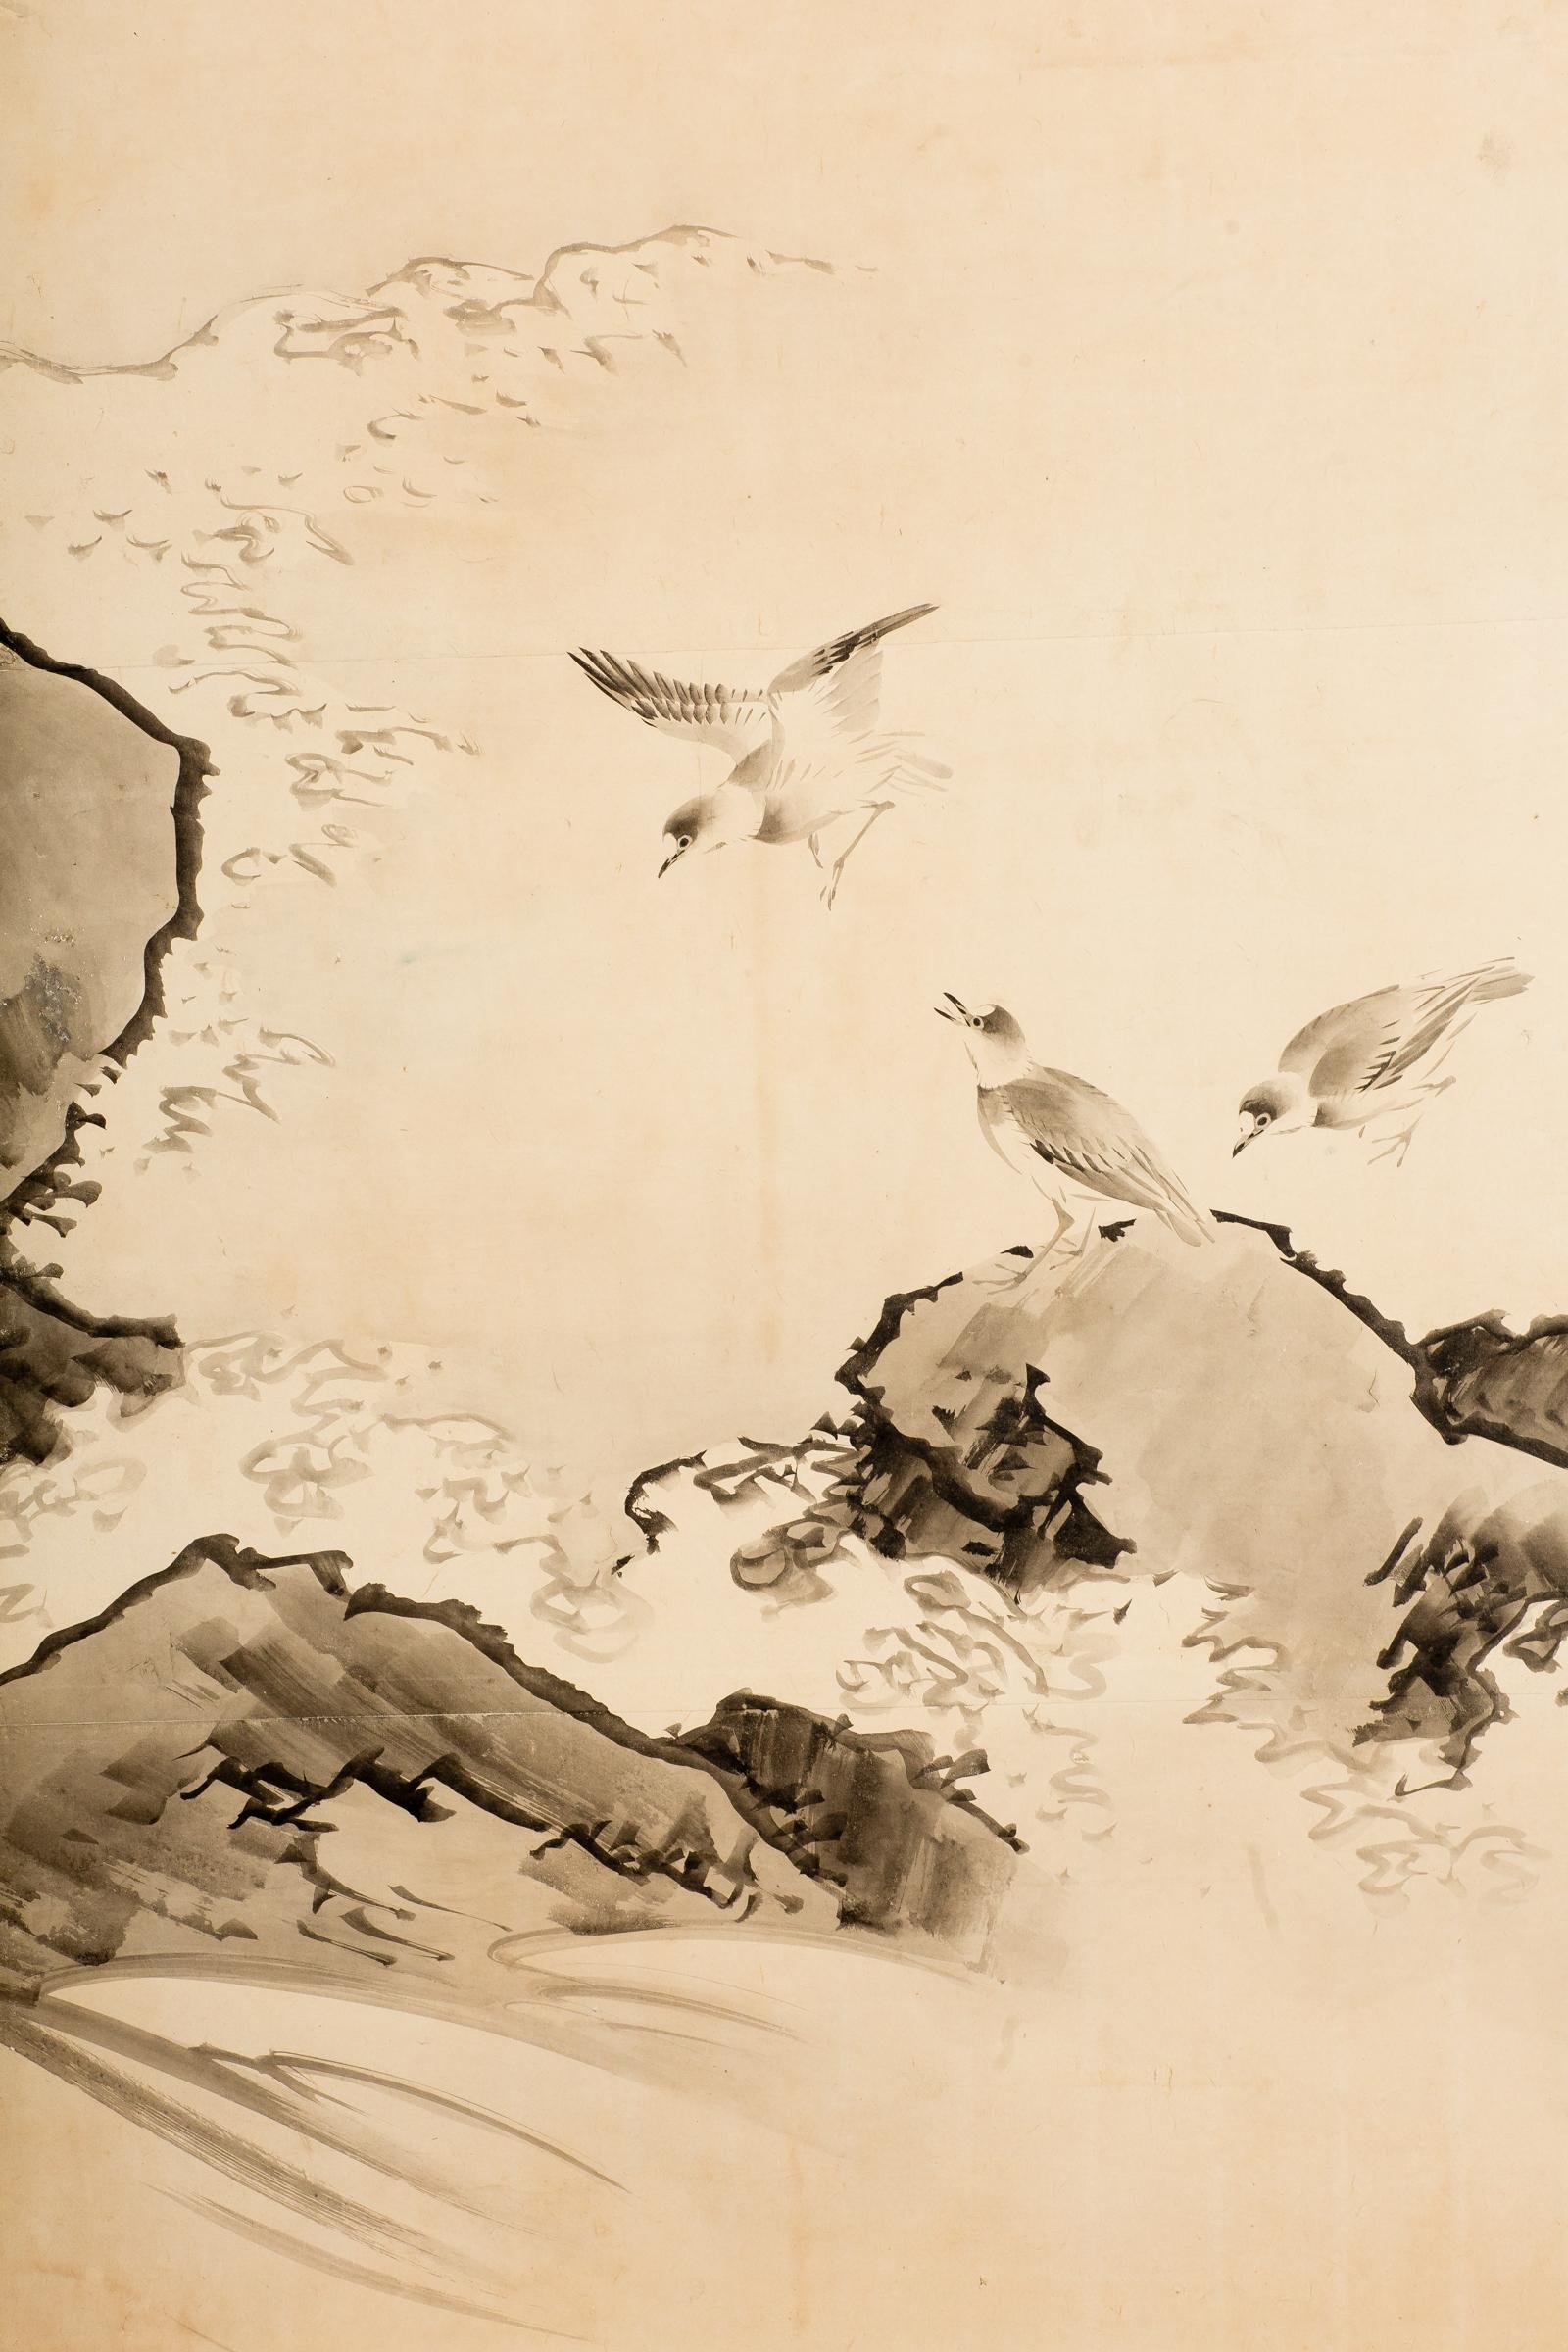 Japanese six-panel screen: Plovers in flight over coastal landscape. Late Edo - Early Meiji period, circa 1870, painting of plovers flying over cresting waves. Sumi ink on mulberry paper with a silk brocade border, good condition. Signature and seal